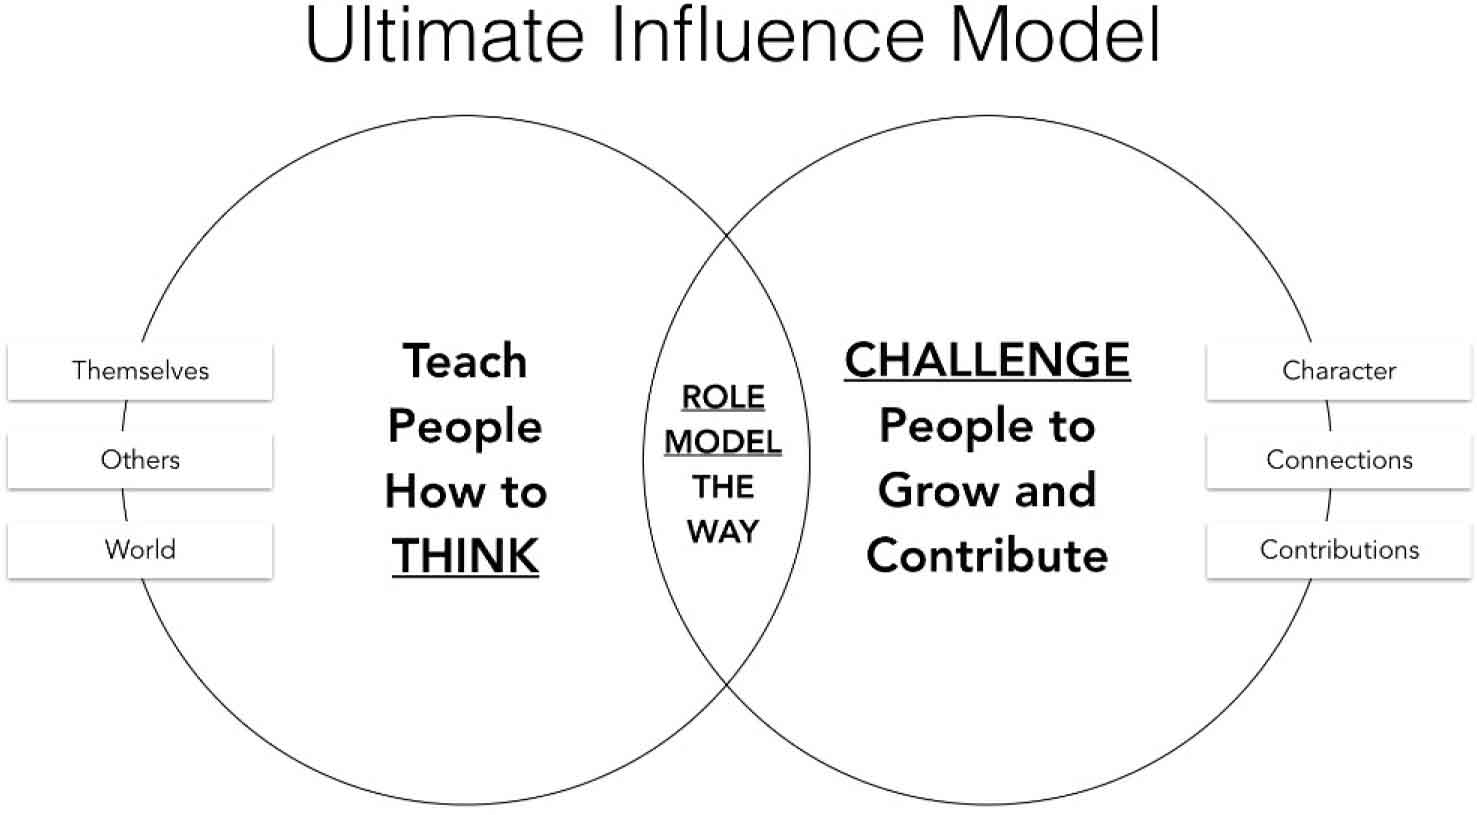 Ultimate influence model